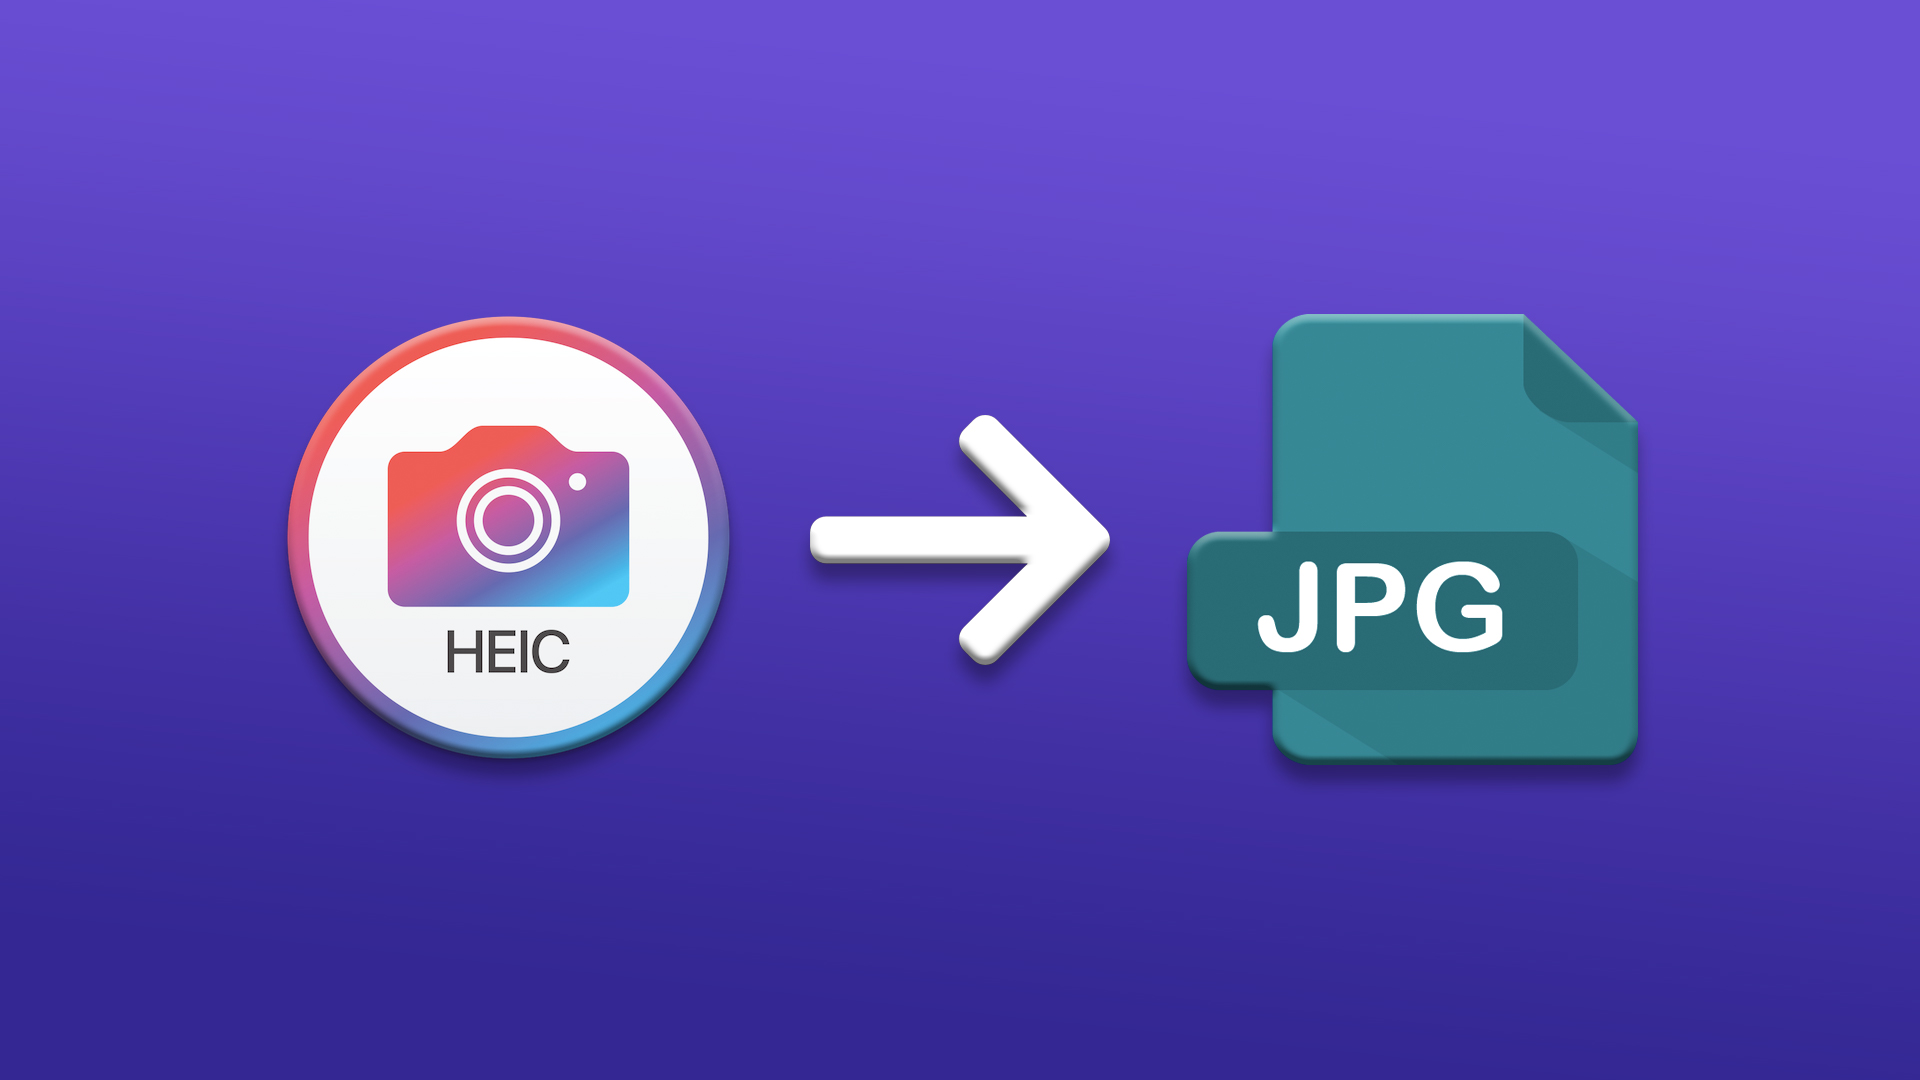 how to convert heic to jpg on iphone